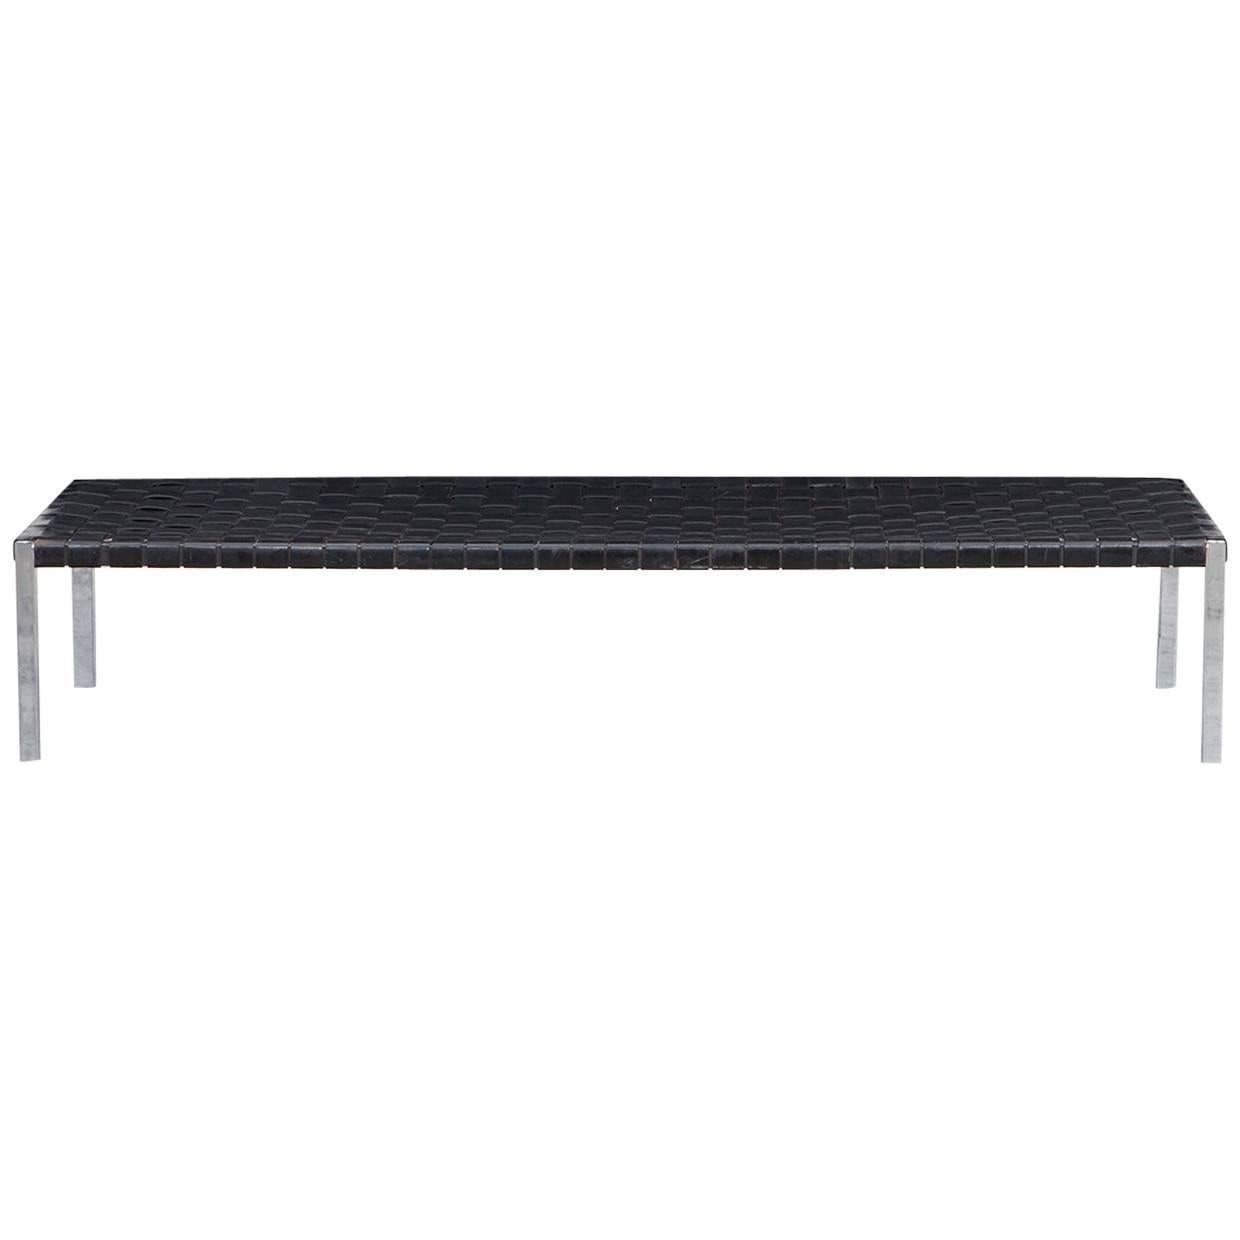 1950's black leather and metal Bench by Estelle and Erwine Laverne 'B' For Sale